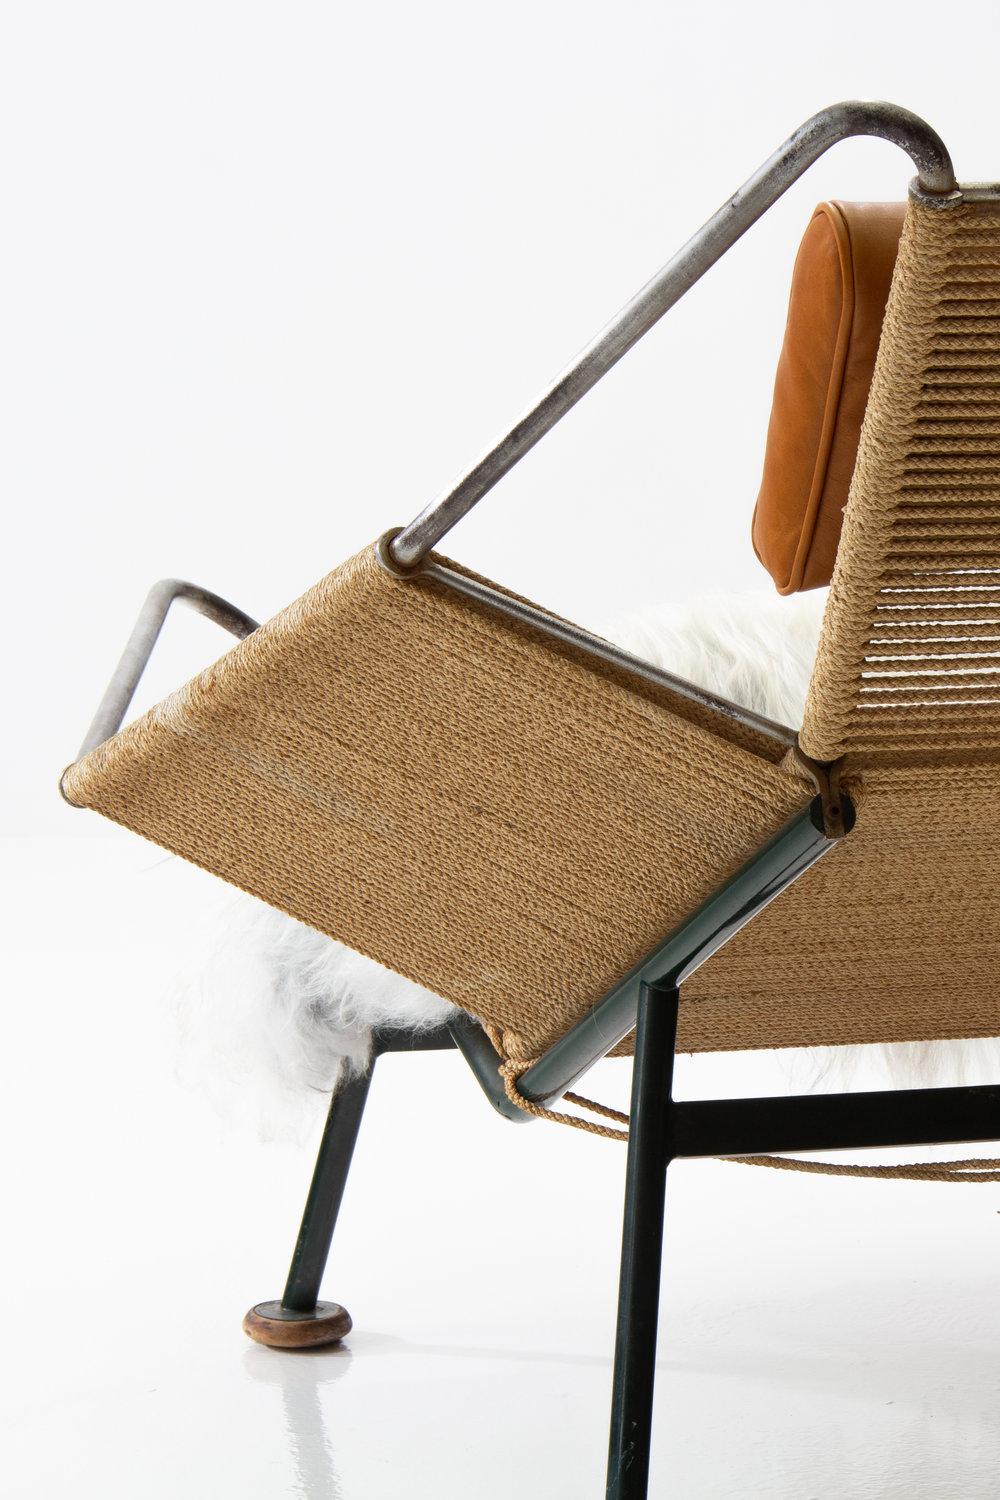 Mid-20th Century Early Flag Halyard Chair GE225 by Hans Wegner with Wooden Feet, Denmark, 1950